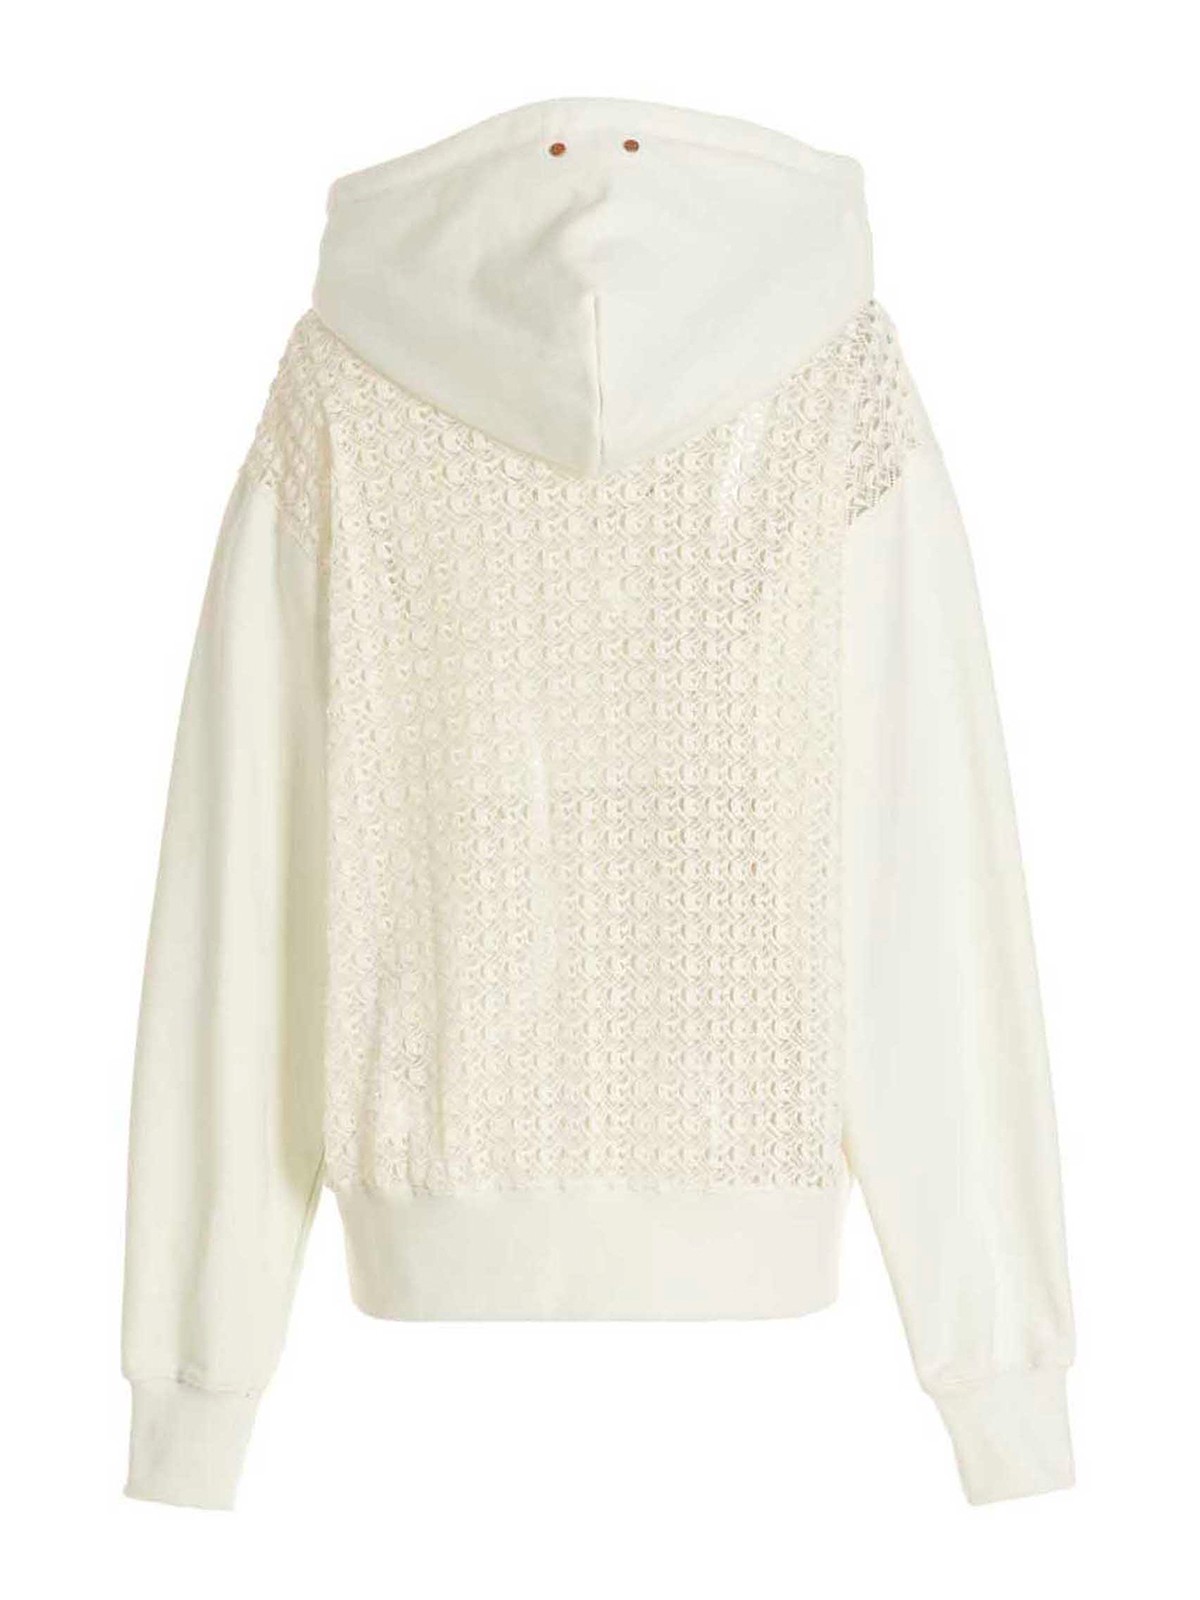 Shop Andersson Bell Sudadera - Blanco In White